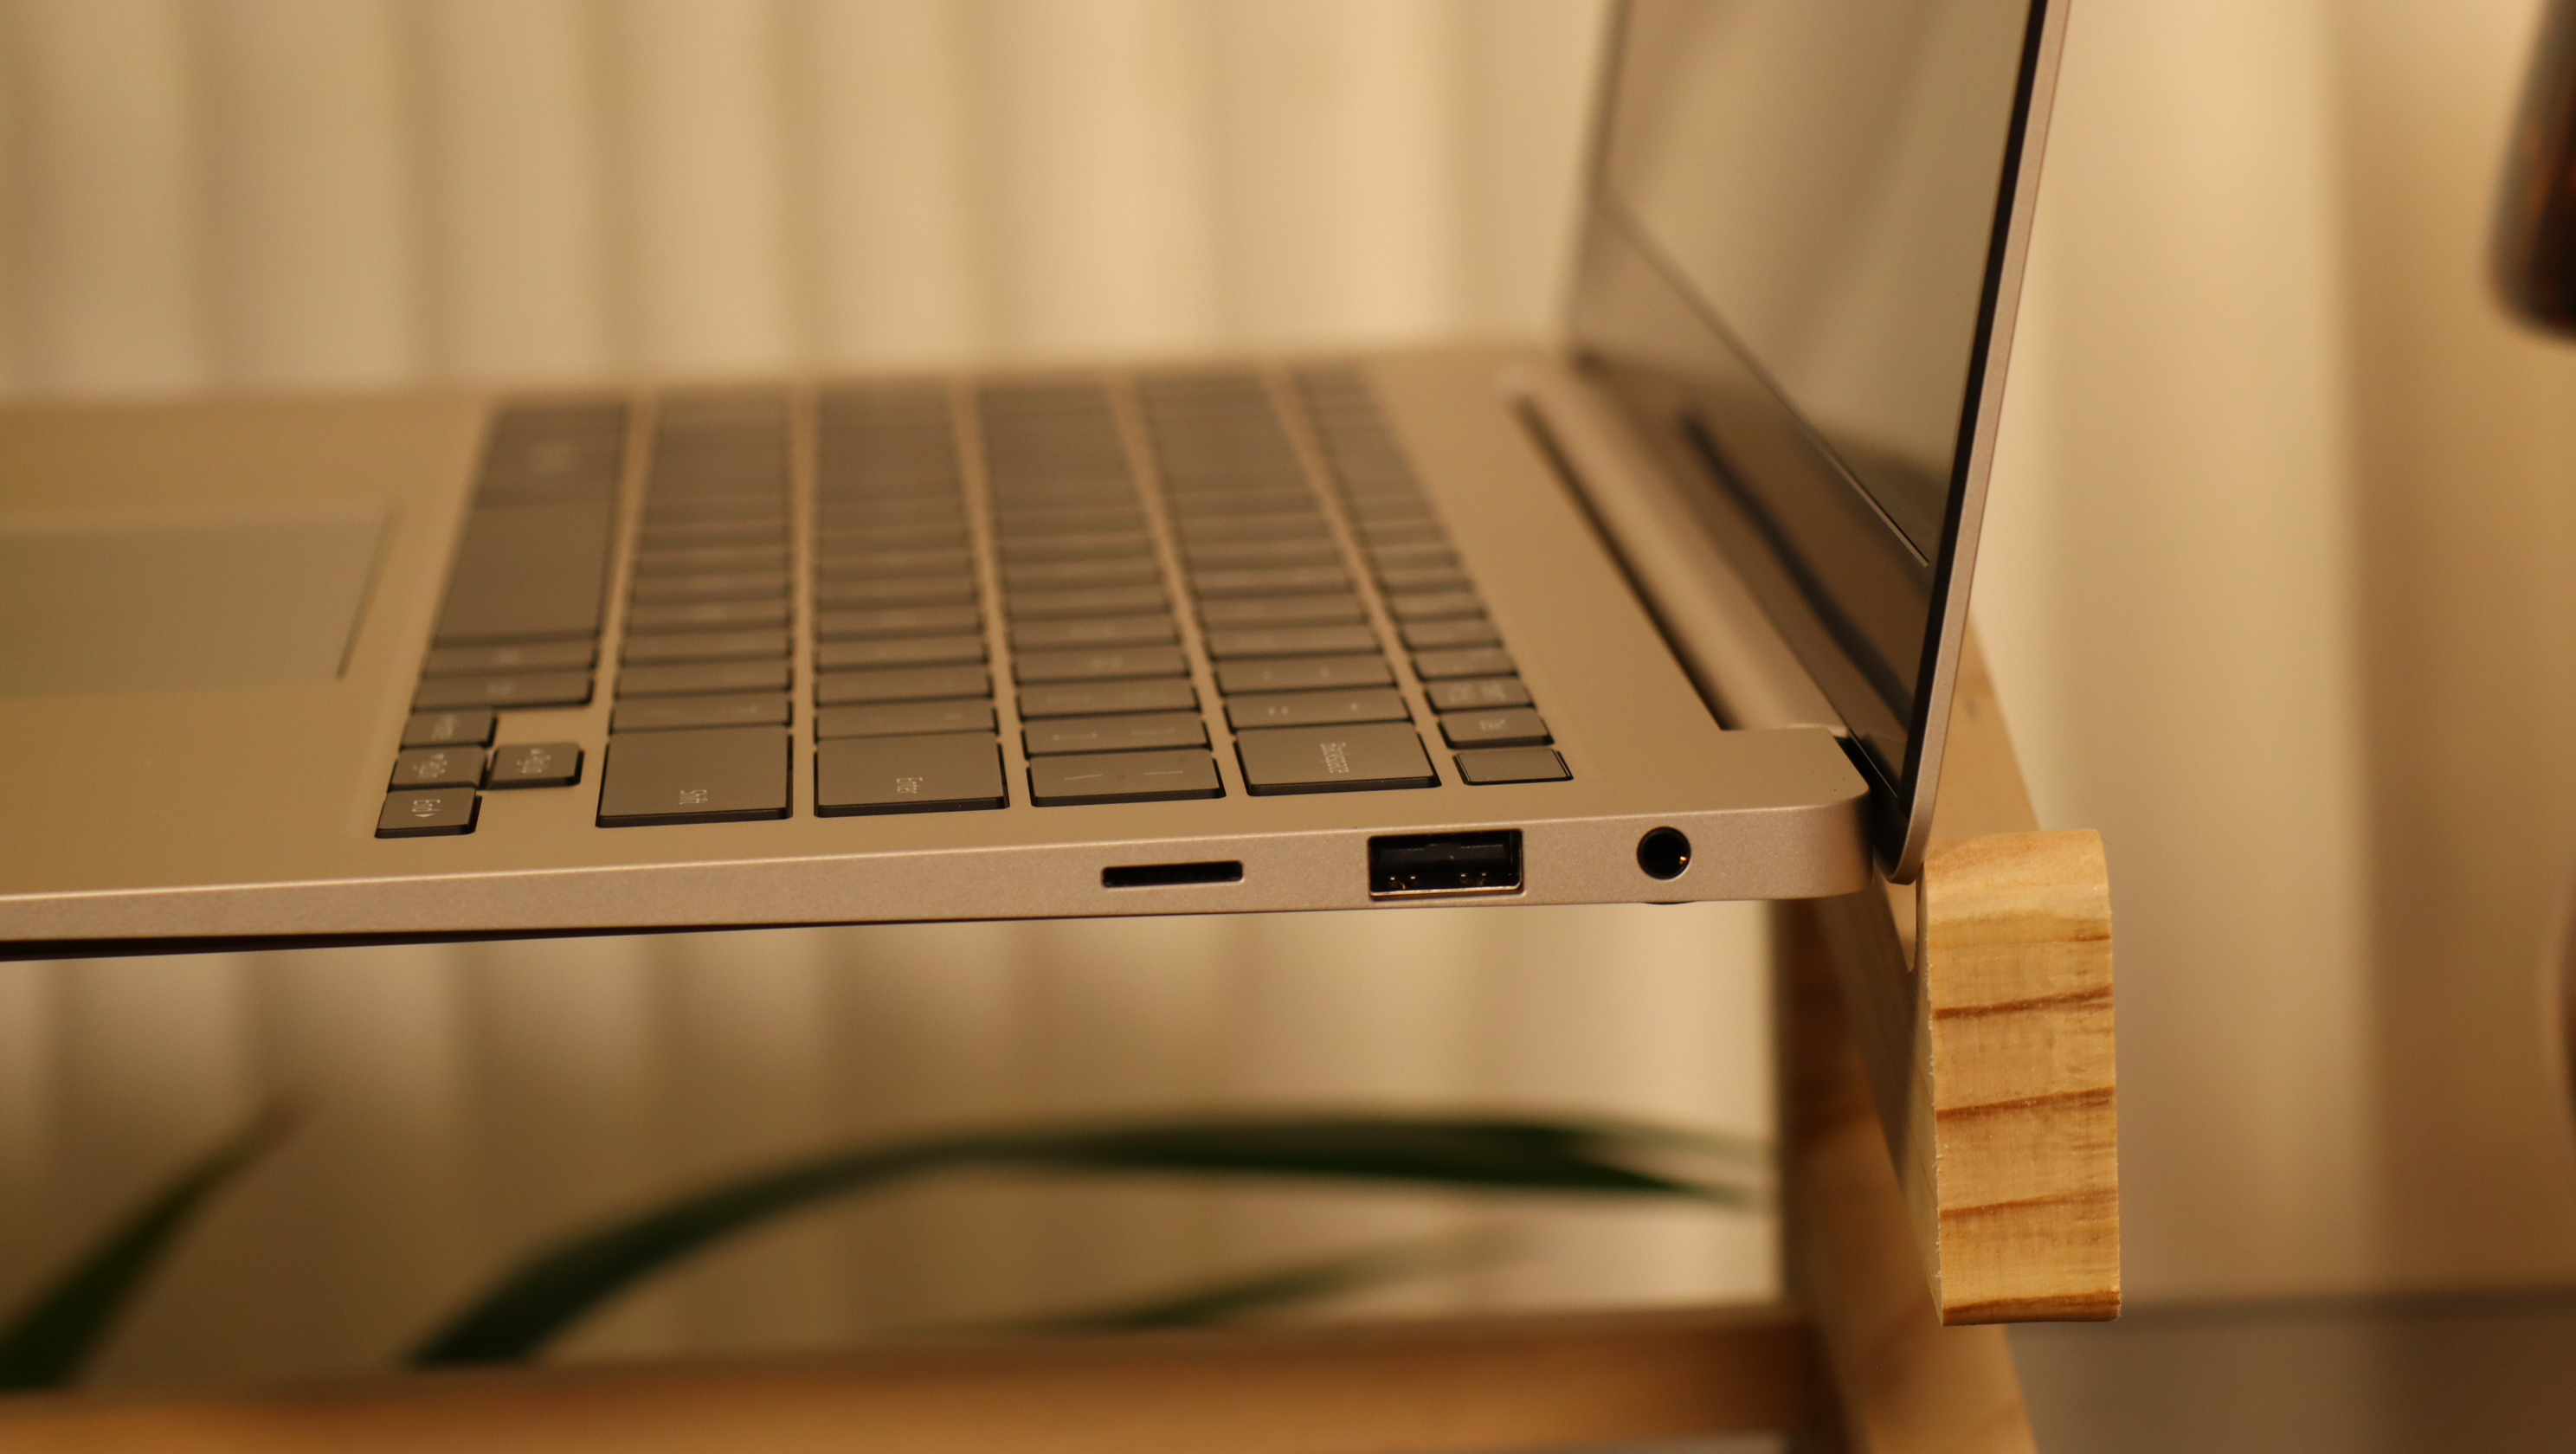 Samsung Galaxy Book3 on a wooden stand